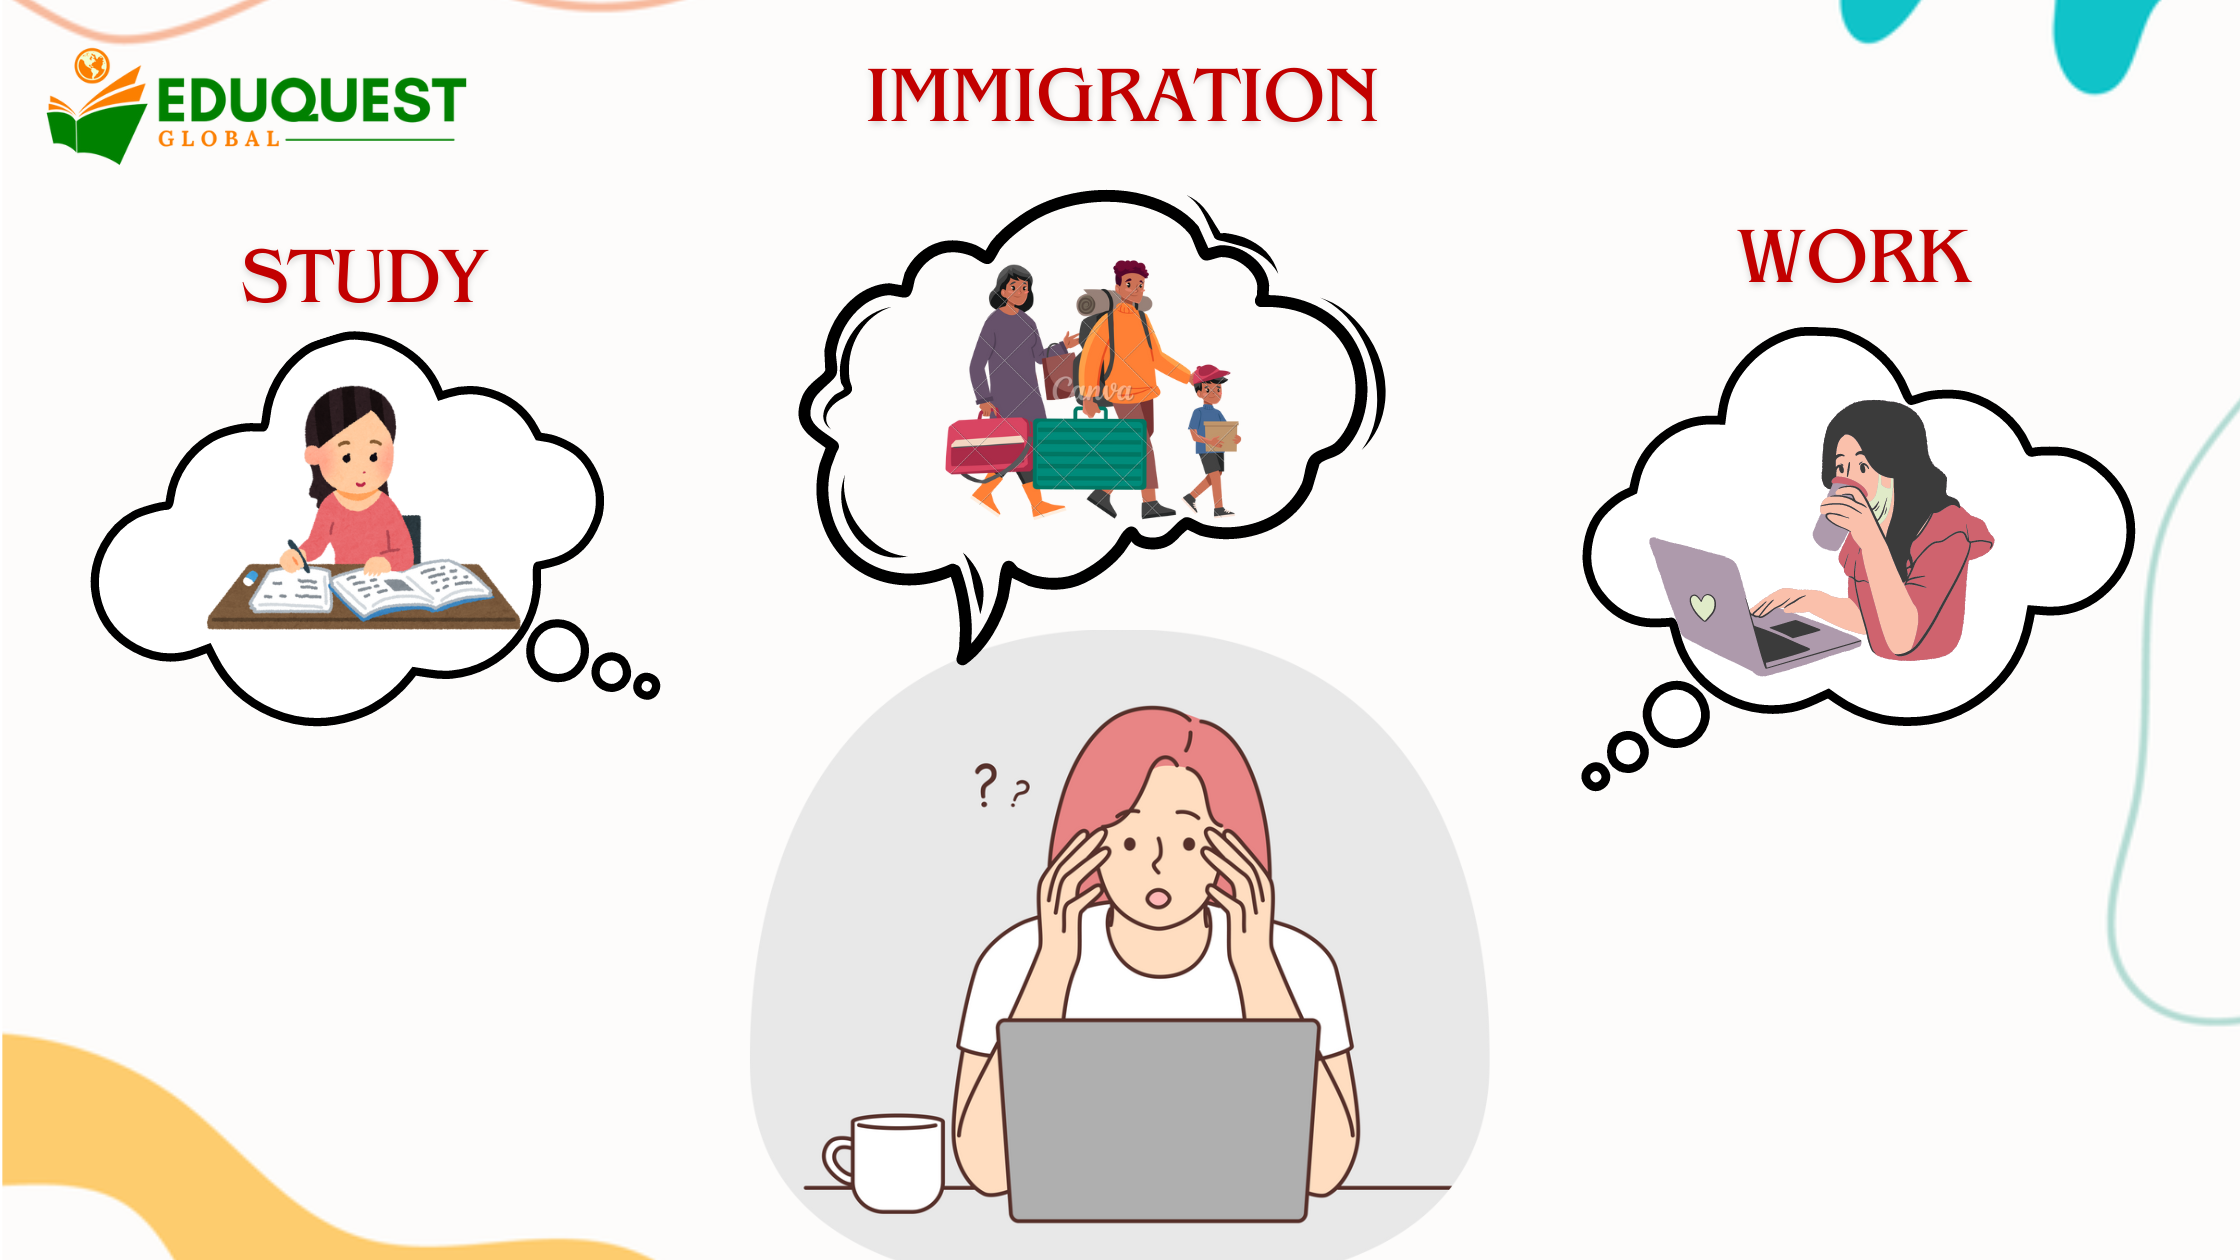 Study, Immigration & Work: Steps to Take After IELTS exam